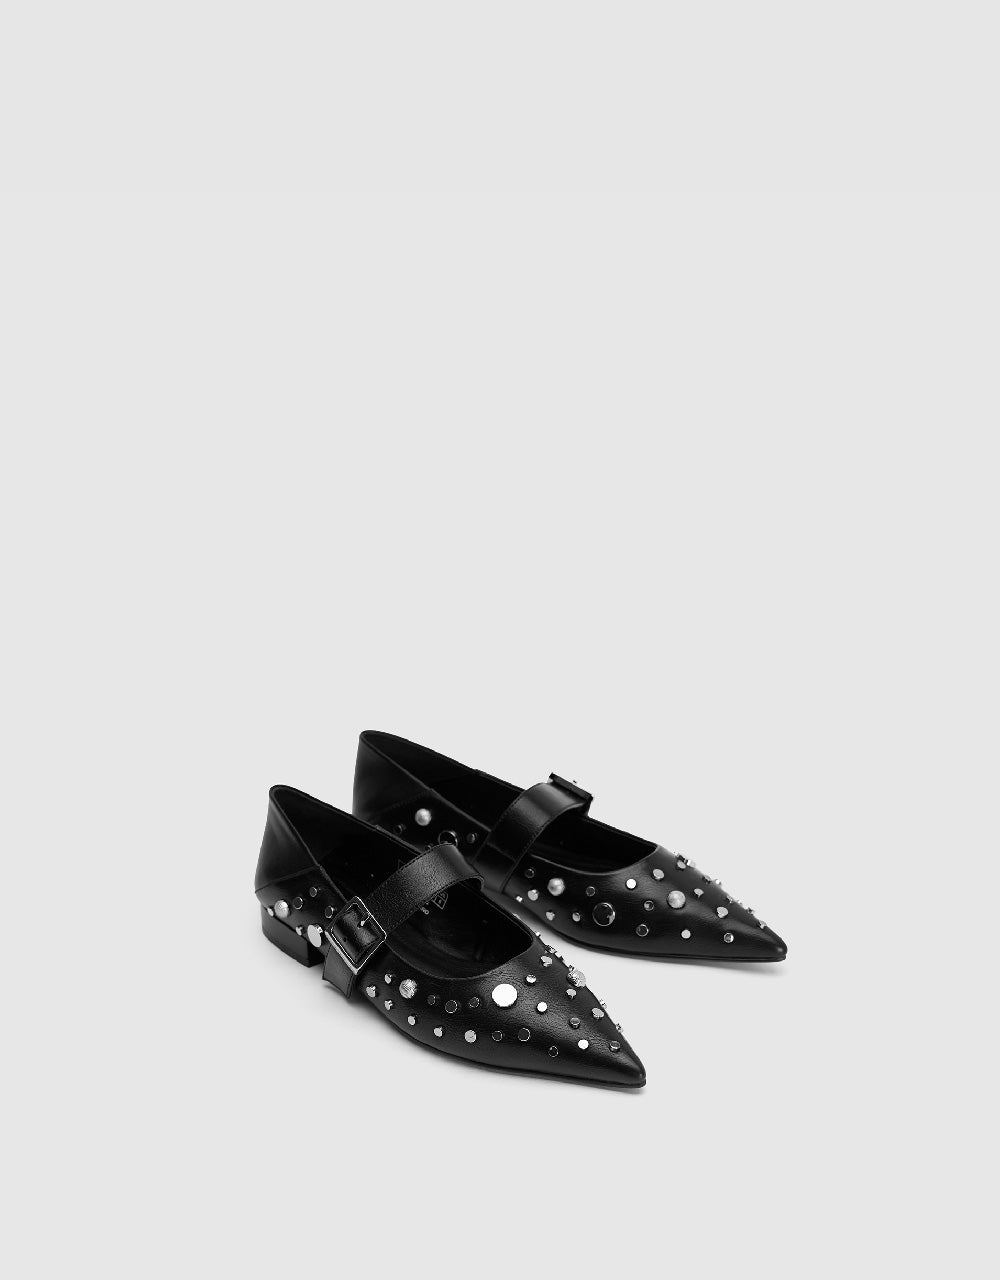 Studded Decor Pointed Toe Pumps